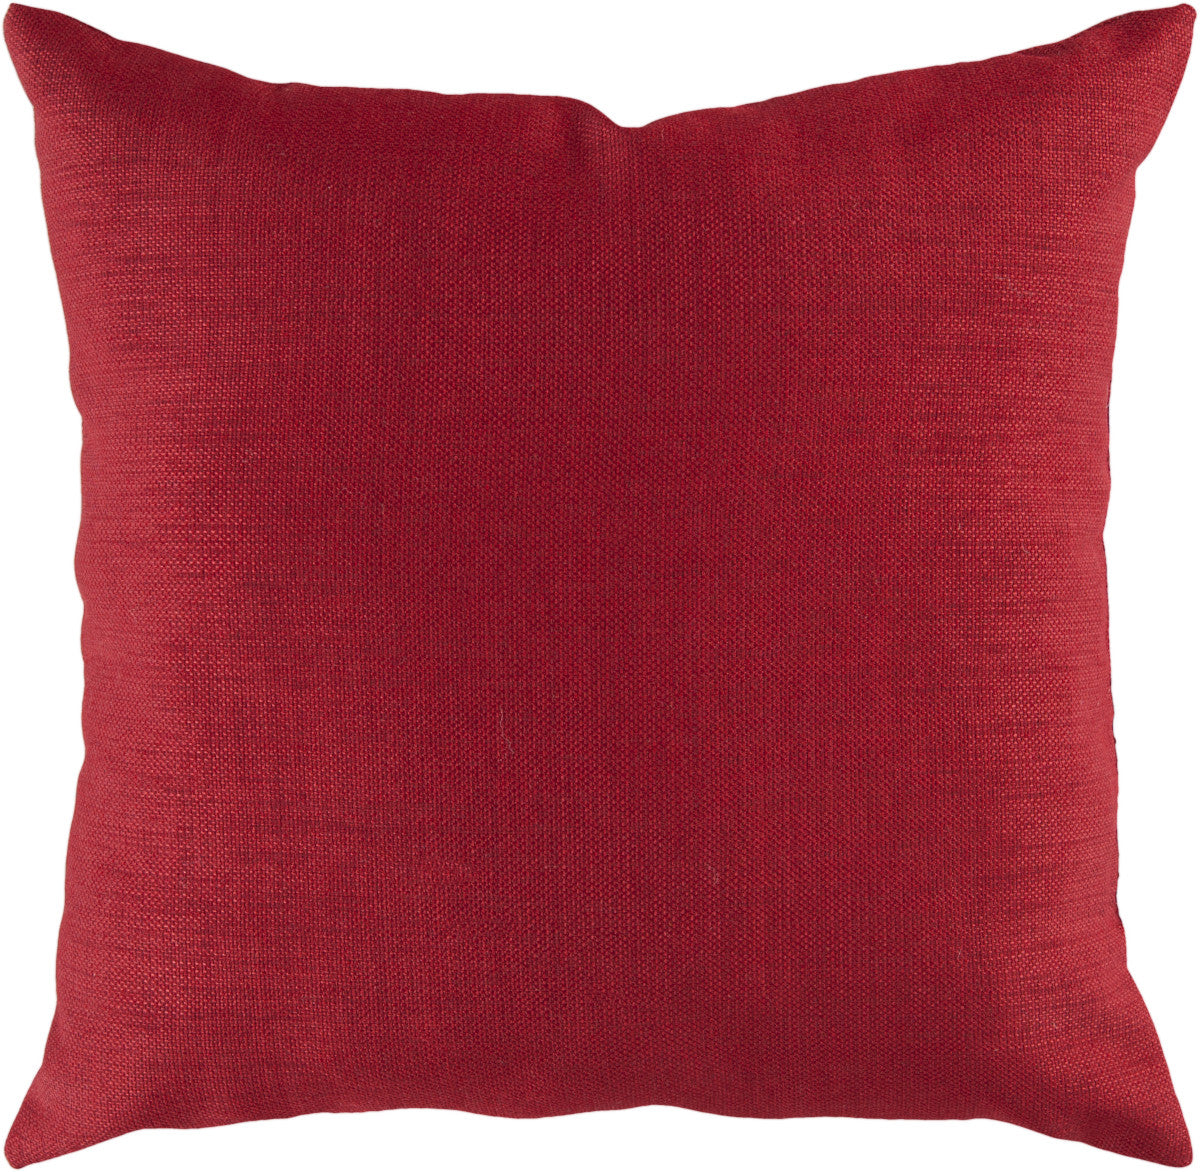 Surya Storm Stunning Solid Cover ZZ-407 Pillow